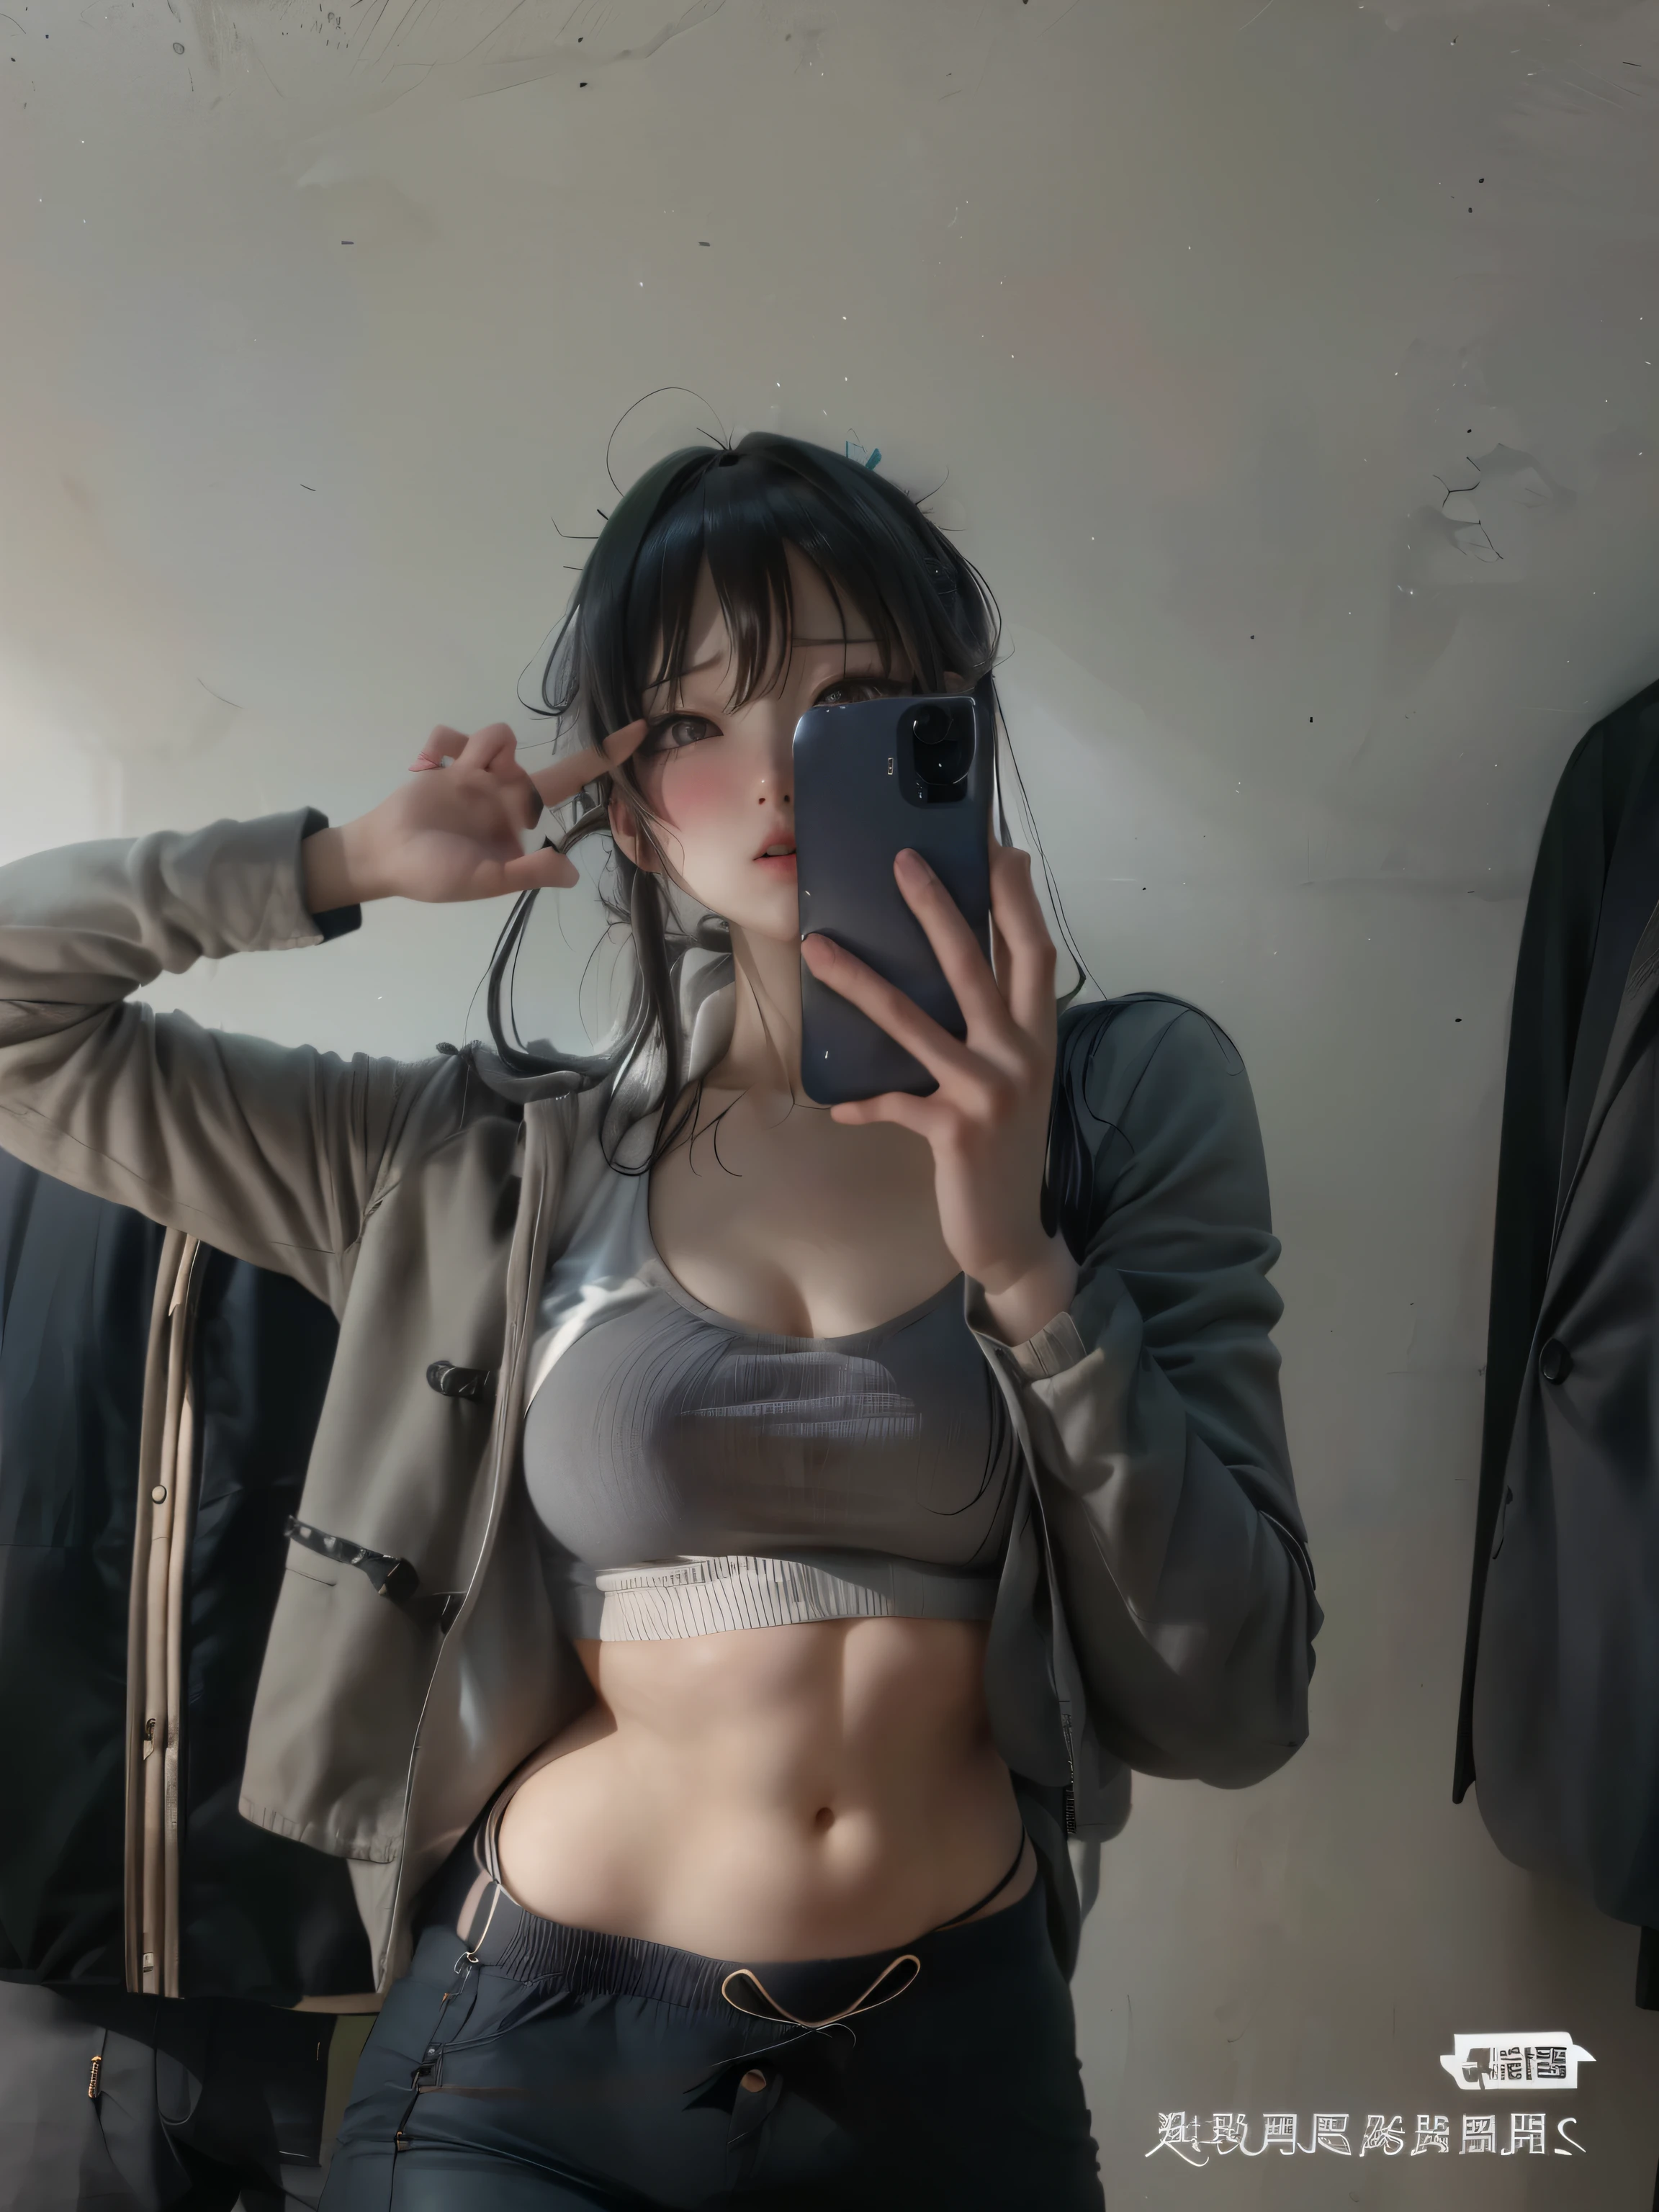 Female waist area，Weak waist，Perfect body，Big breasts and thin waist，(crop top, ）、White skin，reflective skin，of the waist，Perfect waist curve，S-shaped waist curve，Slim waist（（（（（Thin of the waist））））），Vest line，Charming of the waist，waist，waist，No trace of training，Low-waisted pants exposing navel，Small man's waist，，waist，Vest line，sfwSmall man's waist，an hourglass waist，S-shaped waist，The thigh junction  exposed，elongated belly button